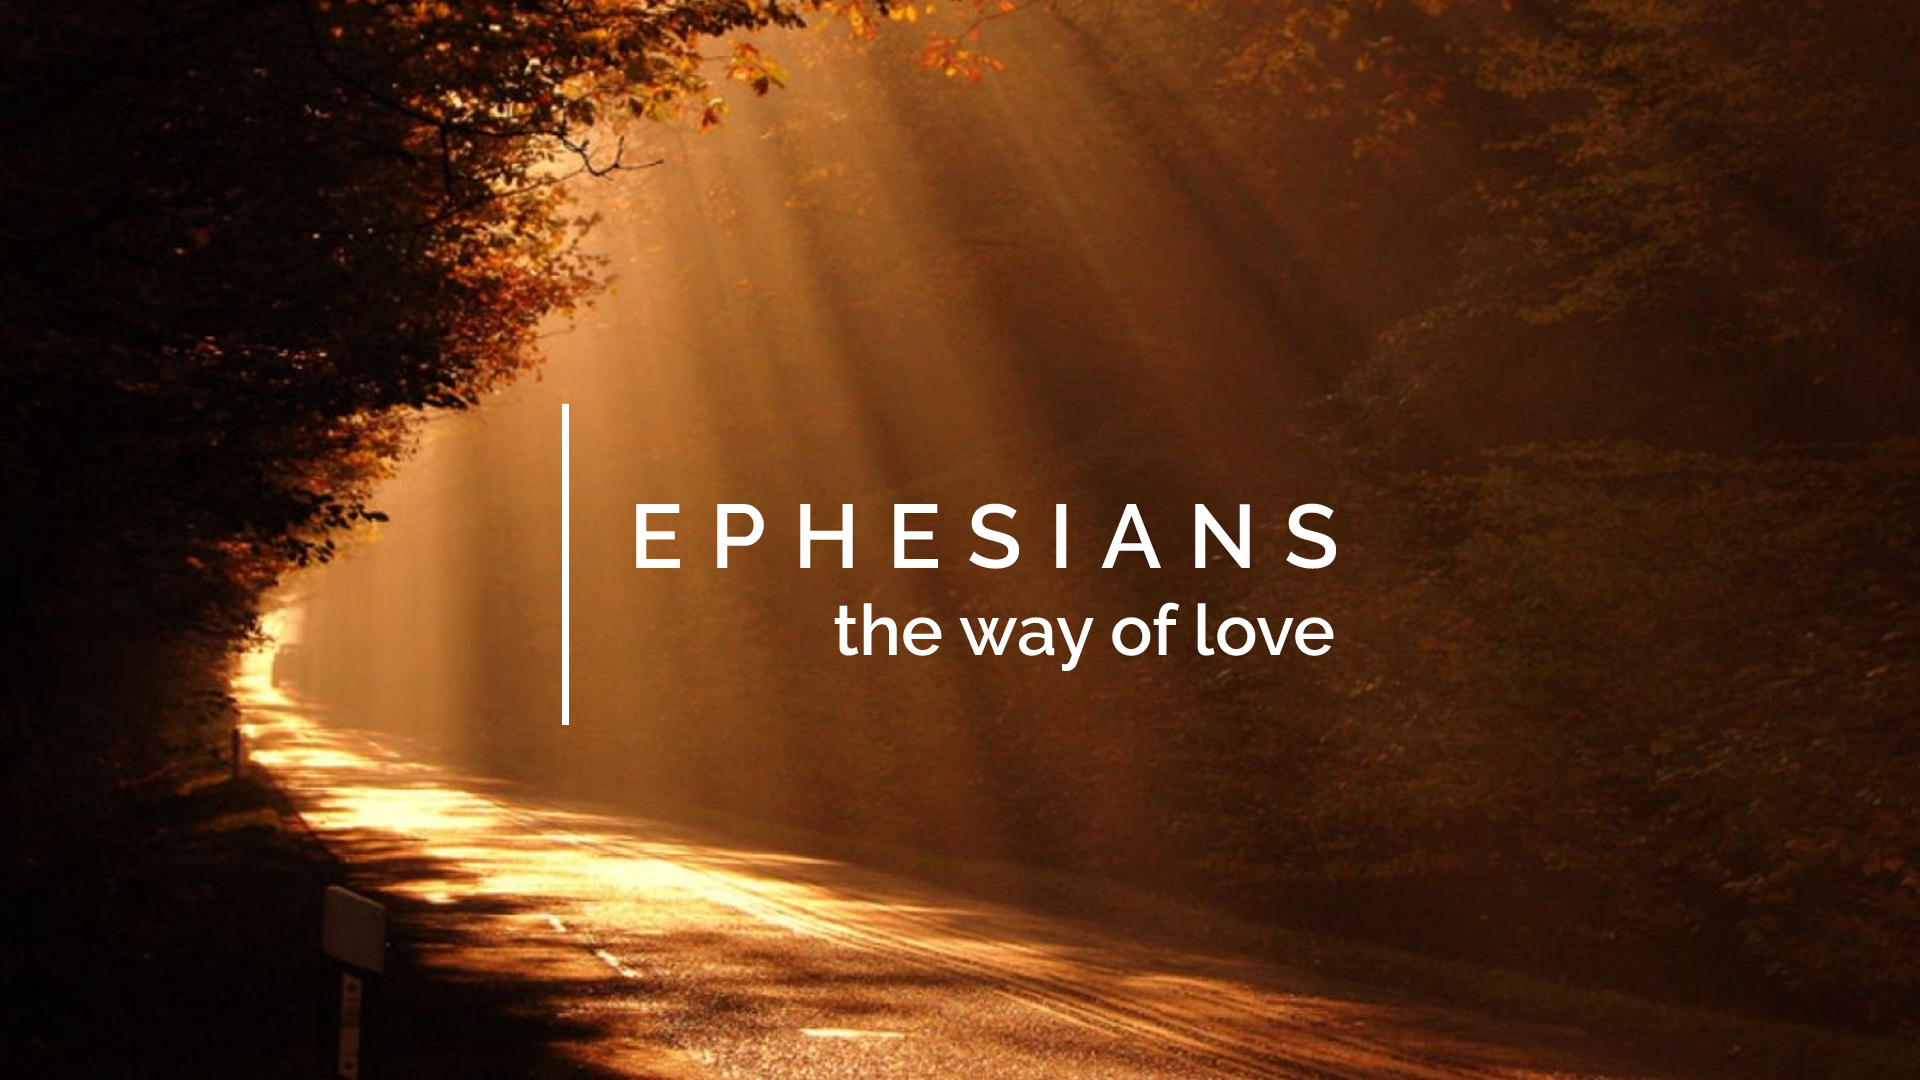 EPHESIANS | The Way of Love - Just Stop It!